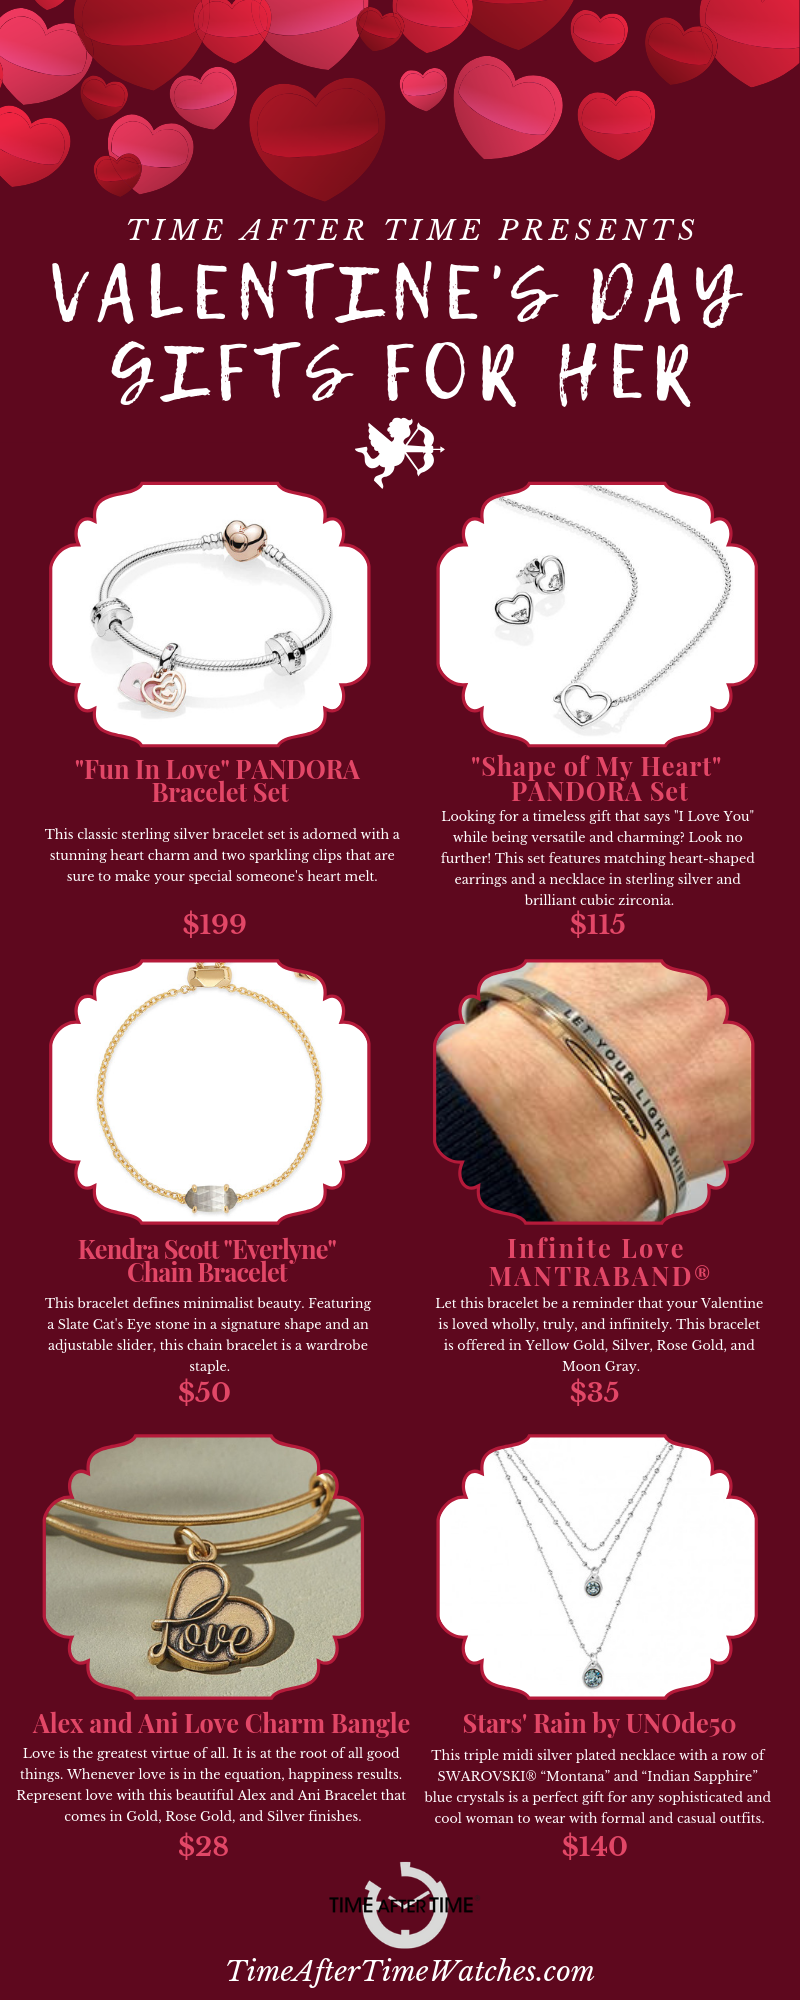 Romantic Valentine’s Day 2019 Gift Ideas for Her